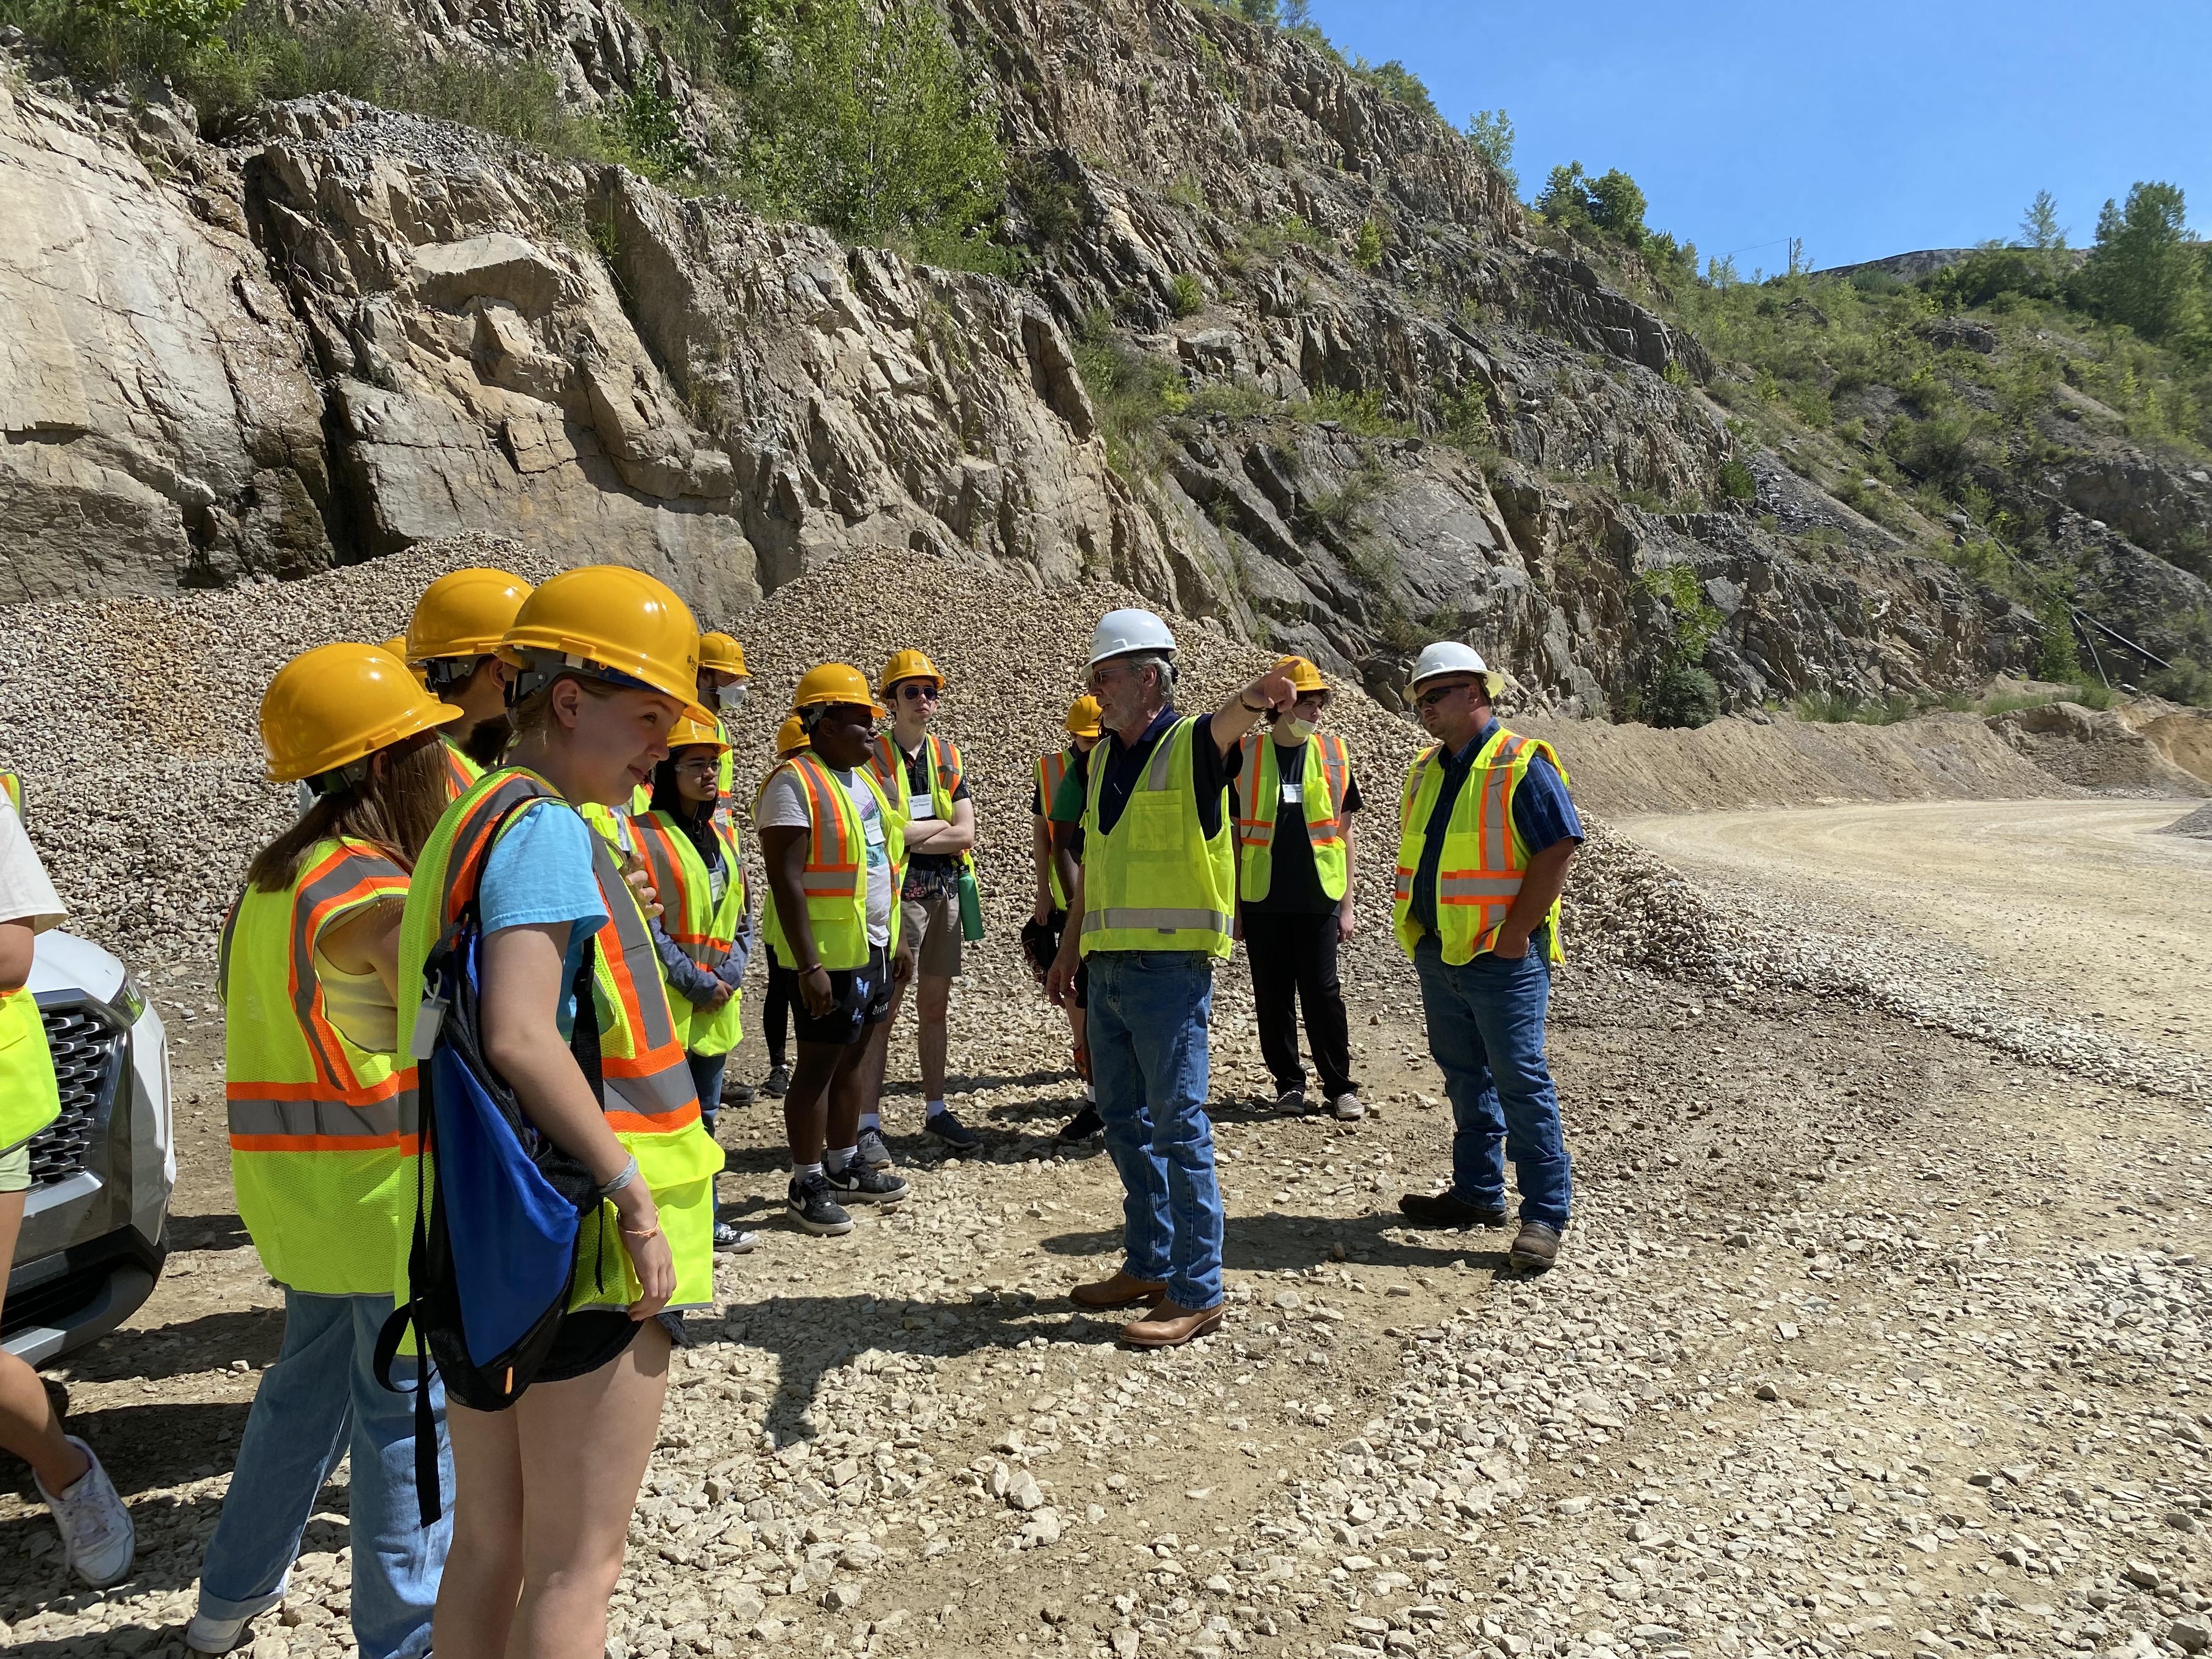 Campers on their field trip at Highway Materials Inc. where they viewed a quarry blast